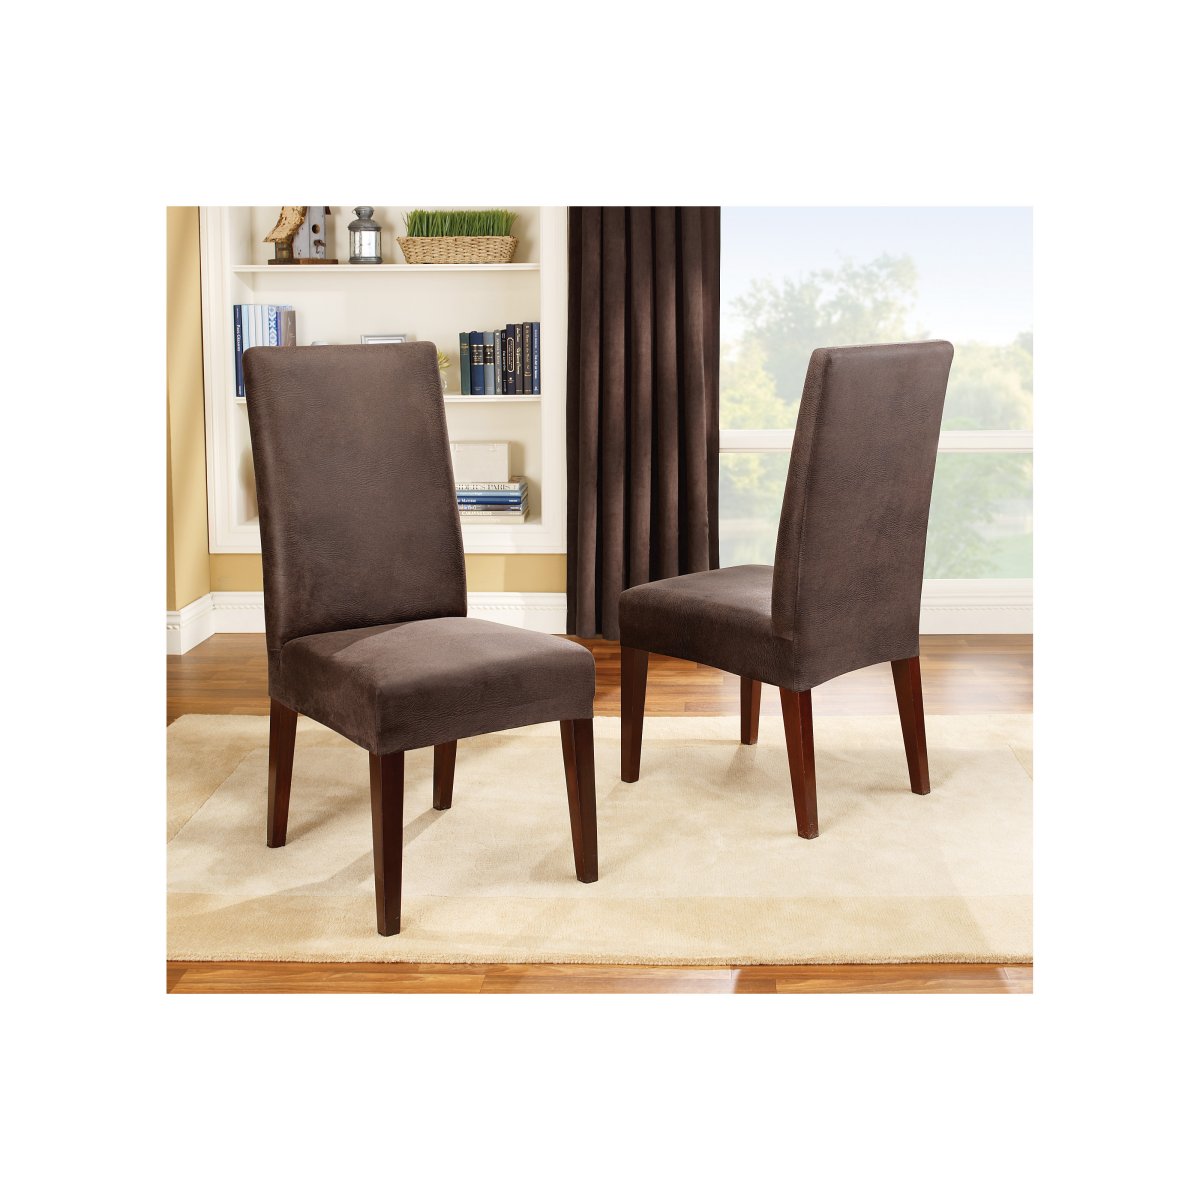 slip covers dining chairs photo - 2